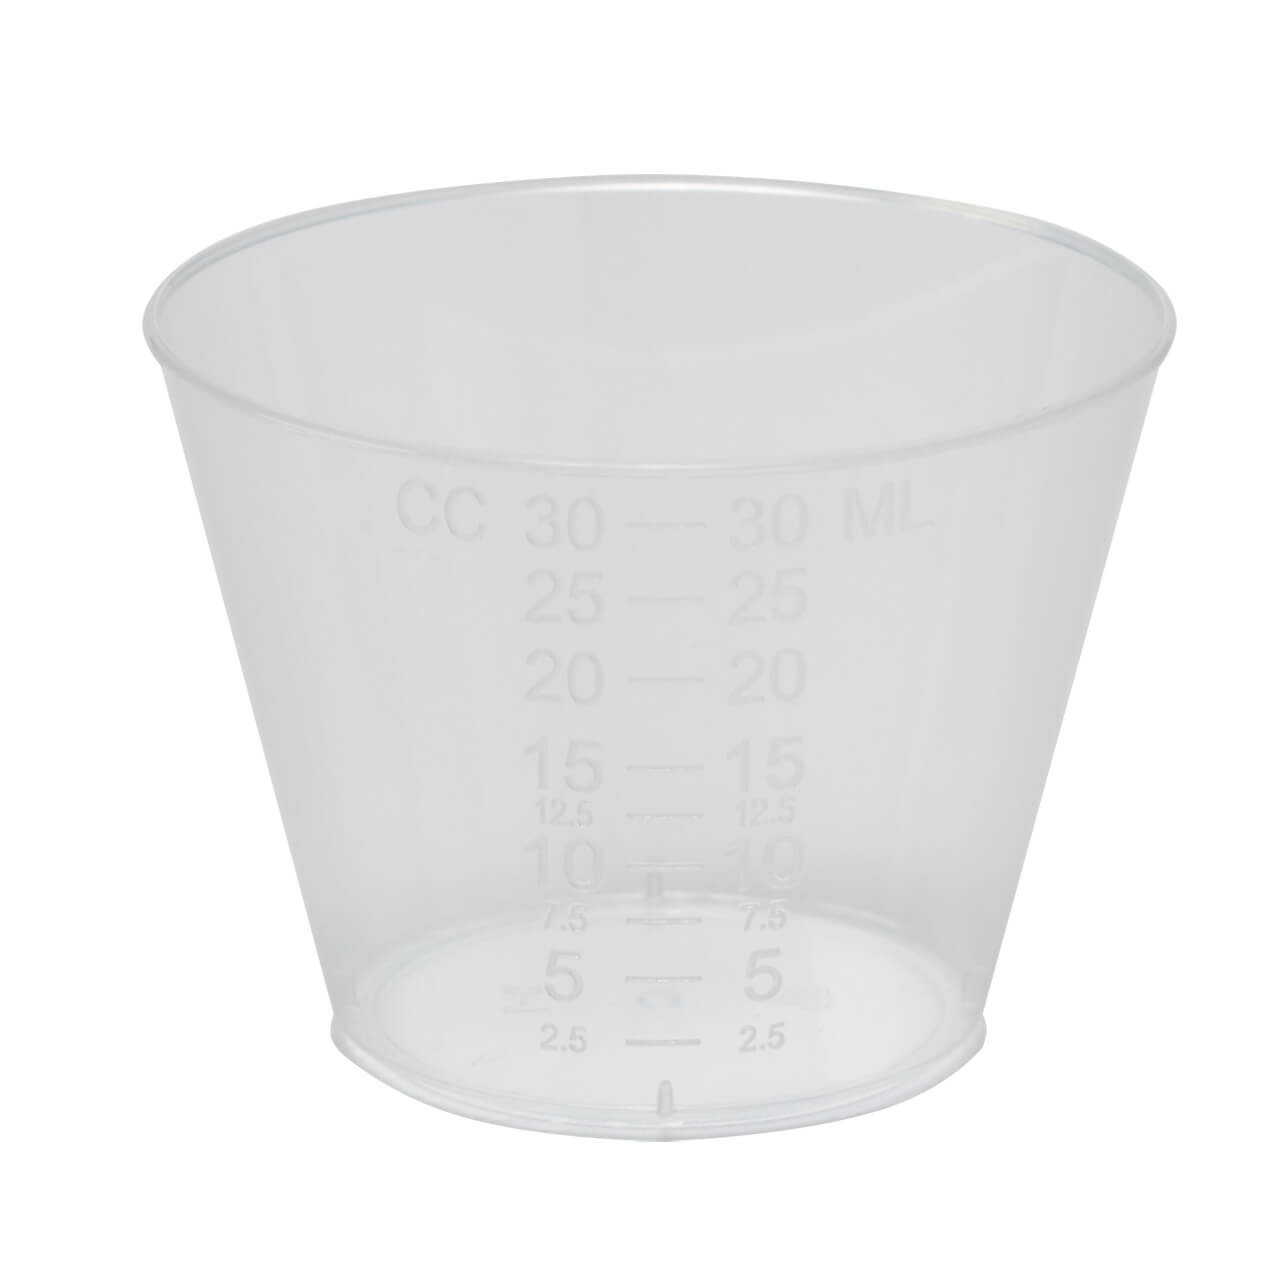  Measuring Cups for Automotive | Transparent - 100ml, 1000ml, Chemical Resistant, High Accuracy